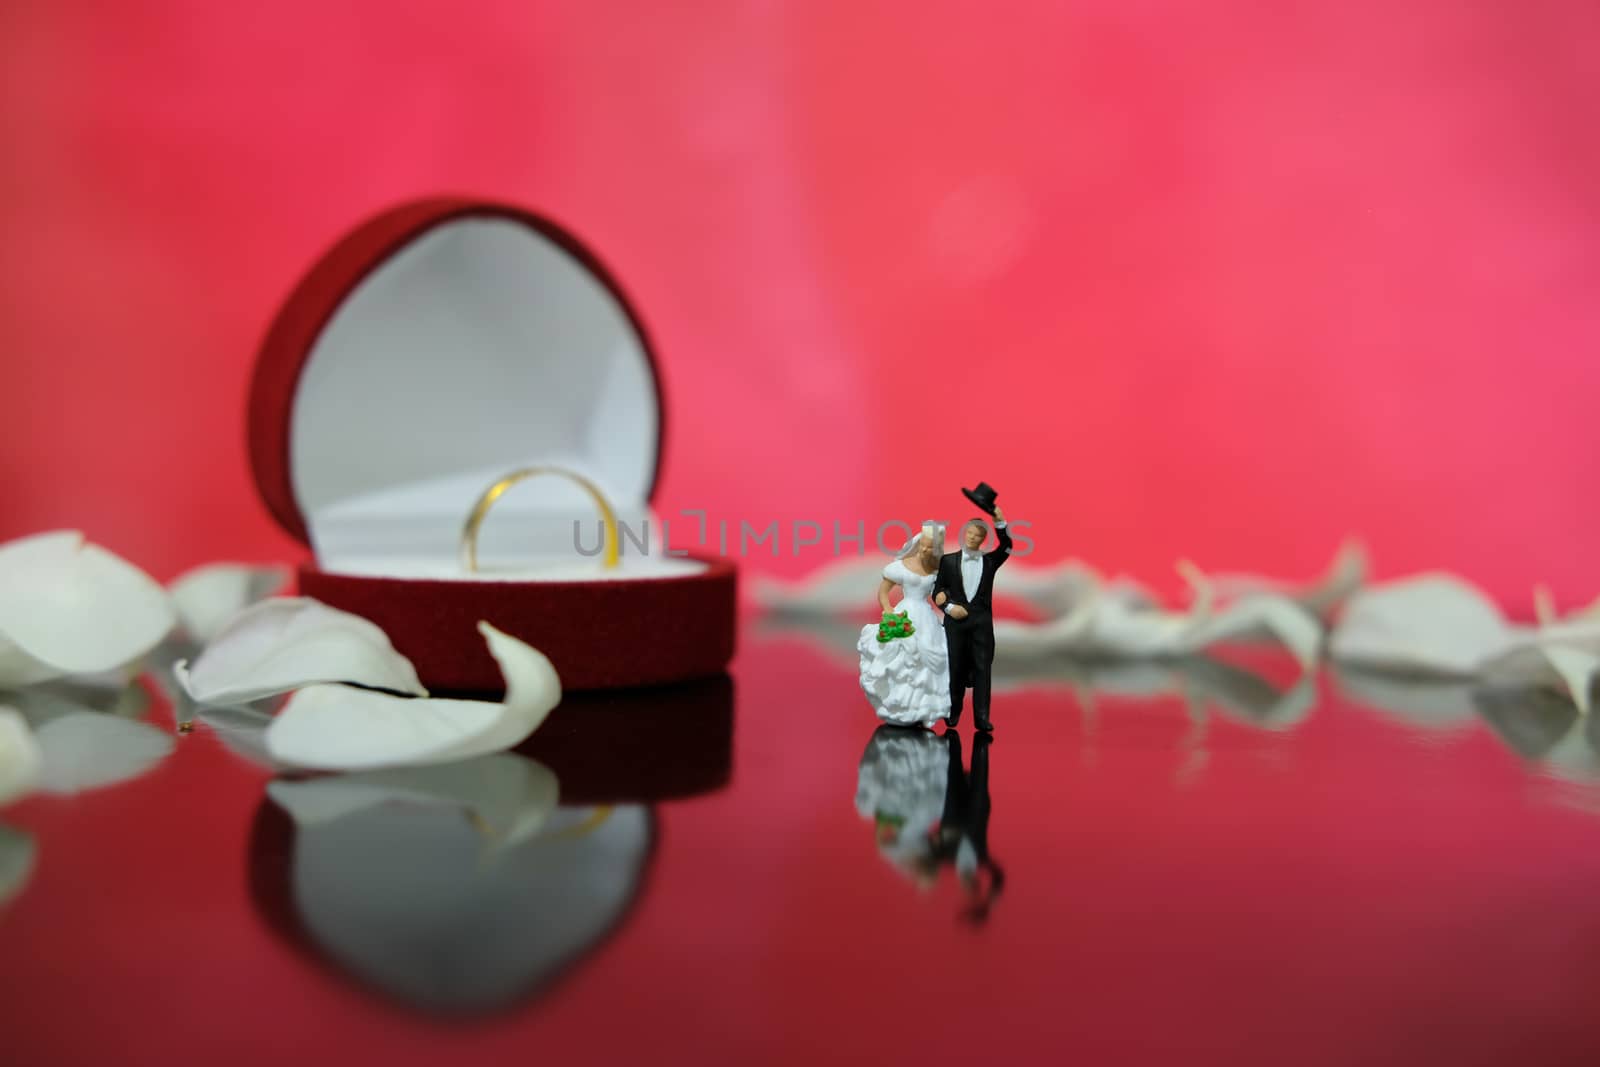 Miniature photography - garden flower outdoor wedding concept, bride and groom walking on shiny floor with white rose petal, including red heart shape ring box by Macrostud